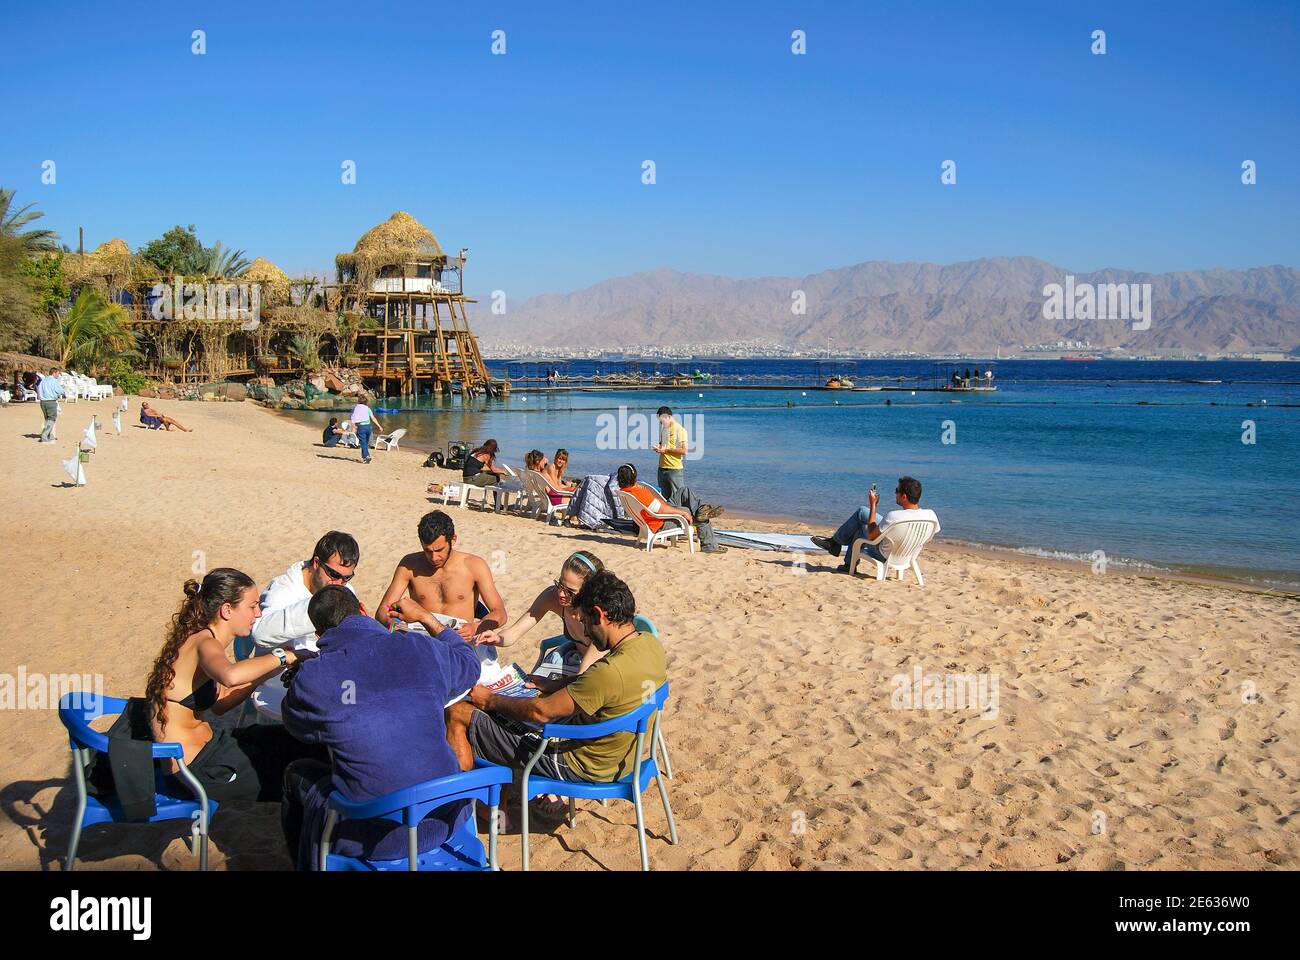 Group at table on beach, Dolphin Reef, Eilat, South District, Israel Stock Photo